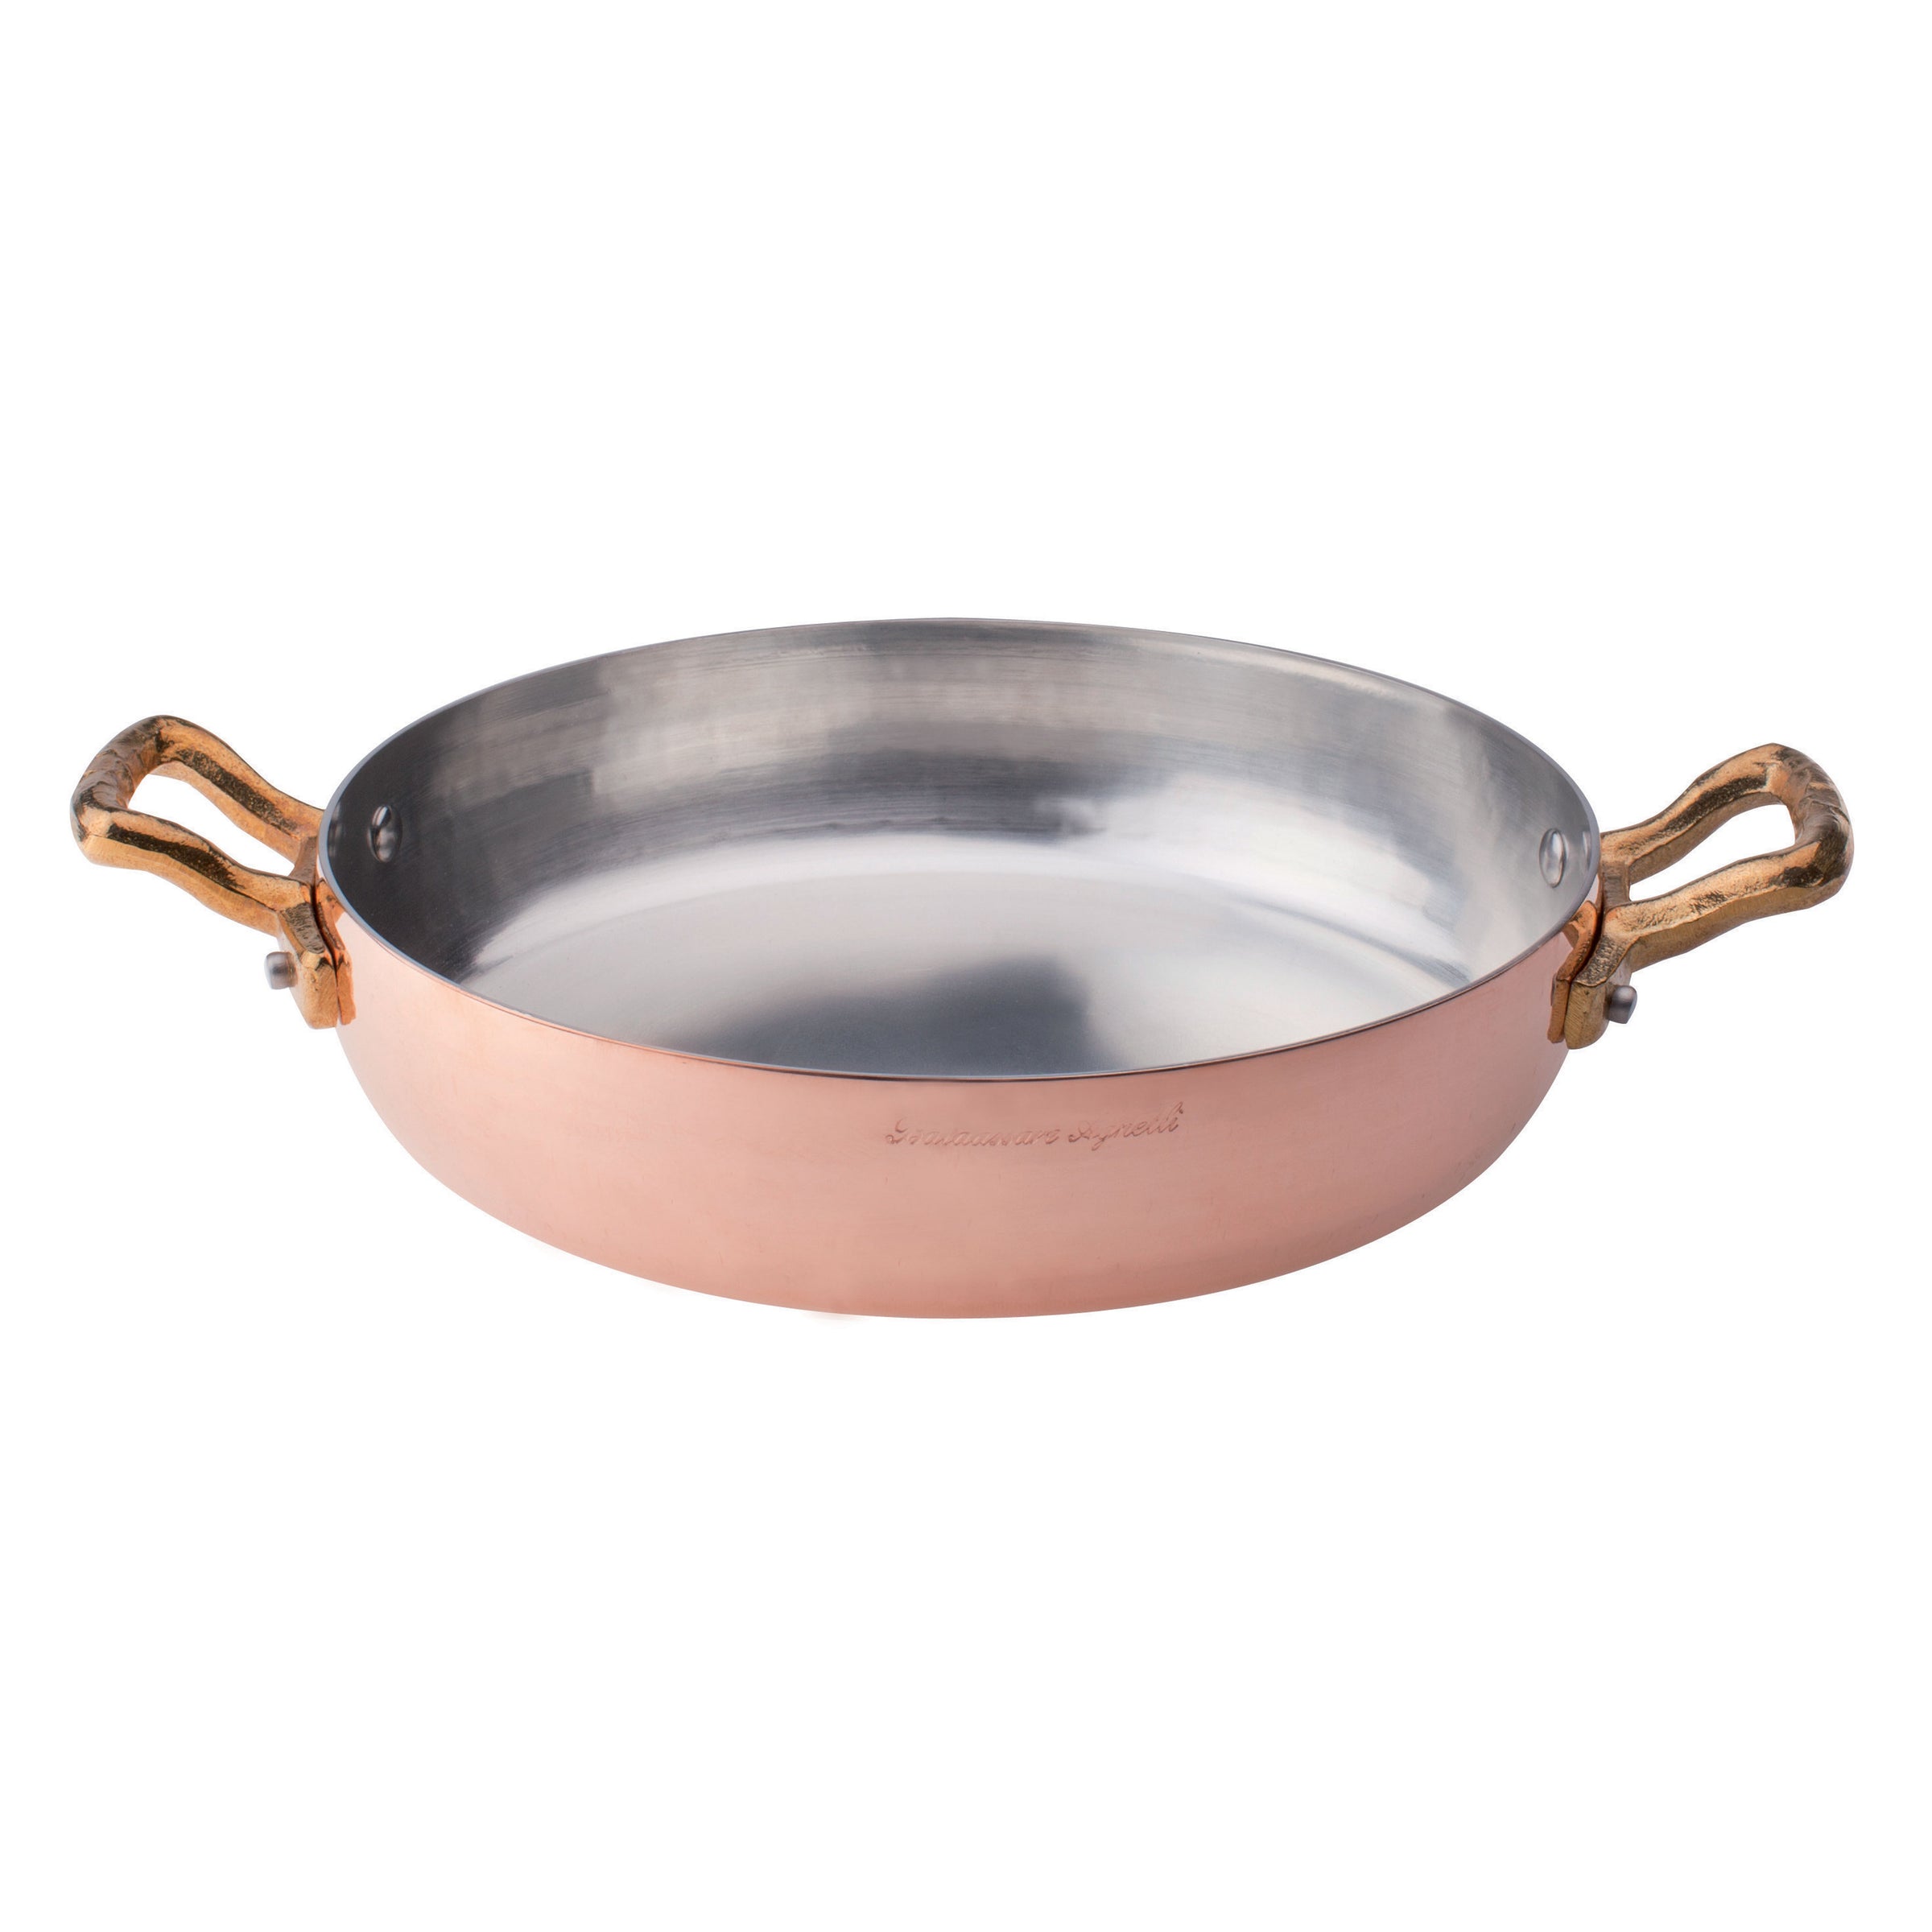 https://agnelliusashop.com/cdn/shop/products/Agnelli-Hammered-Tinned-Copper-Omelette-Pan-With-Two-Brass-Handles_1f65c879-0d04-4db8-ac1f-21df49b49b2a_2400x.jpg?v=1623196086